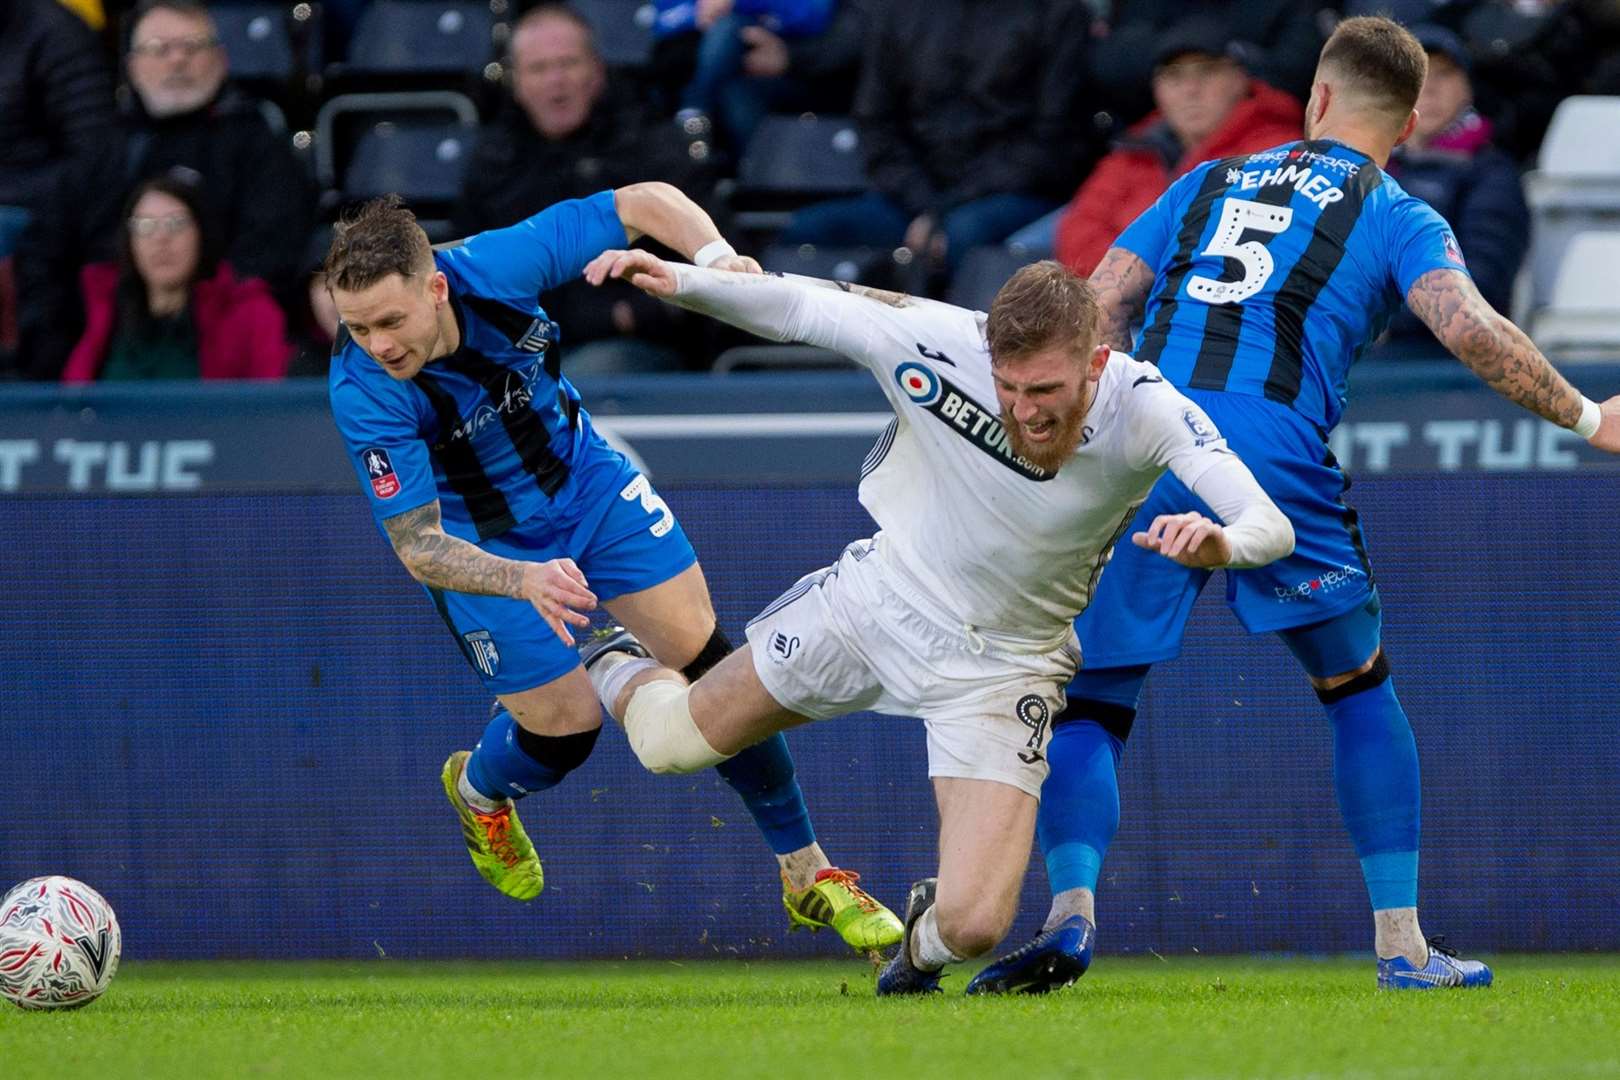 Gillingham last tackled Swansea in January 2019 when they met in the FA Cup